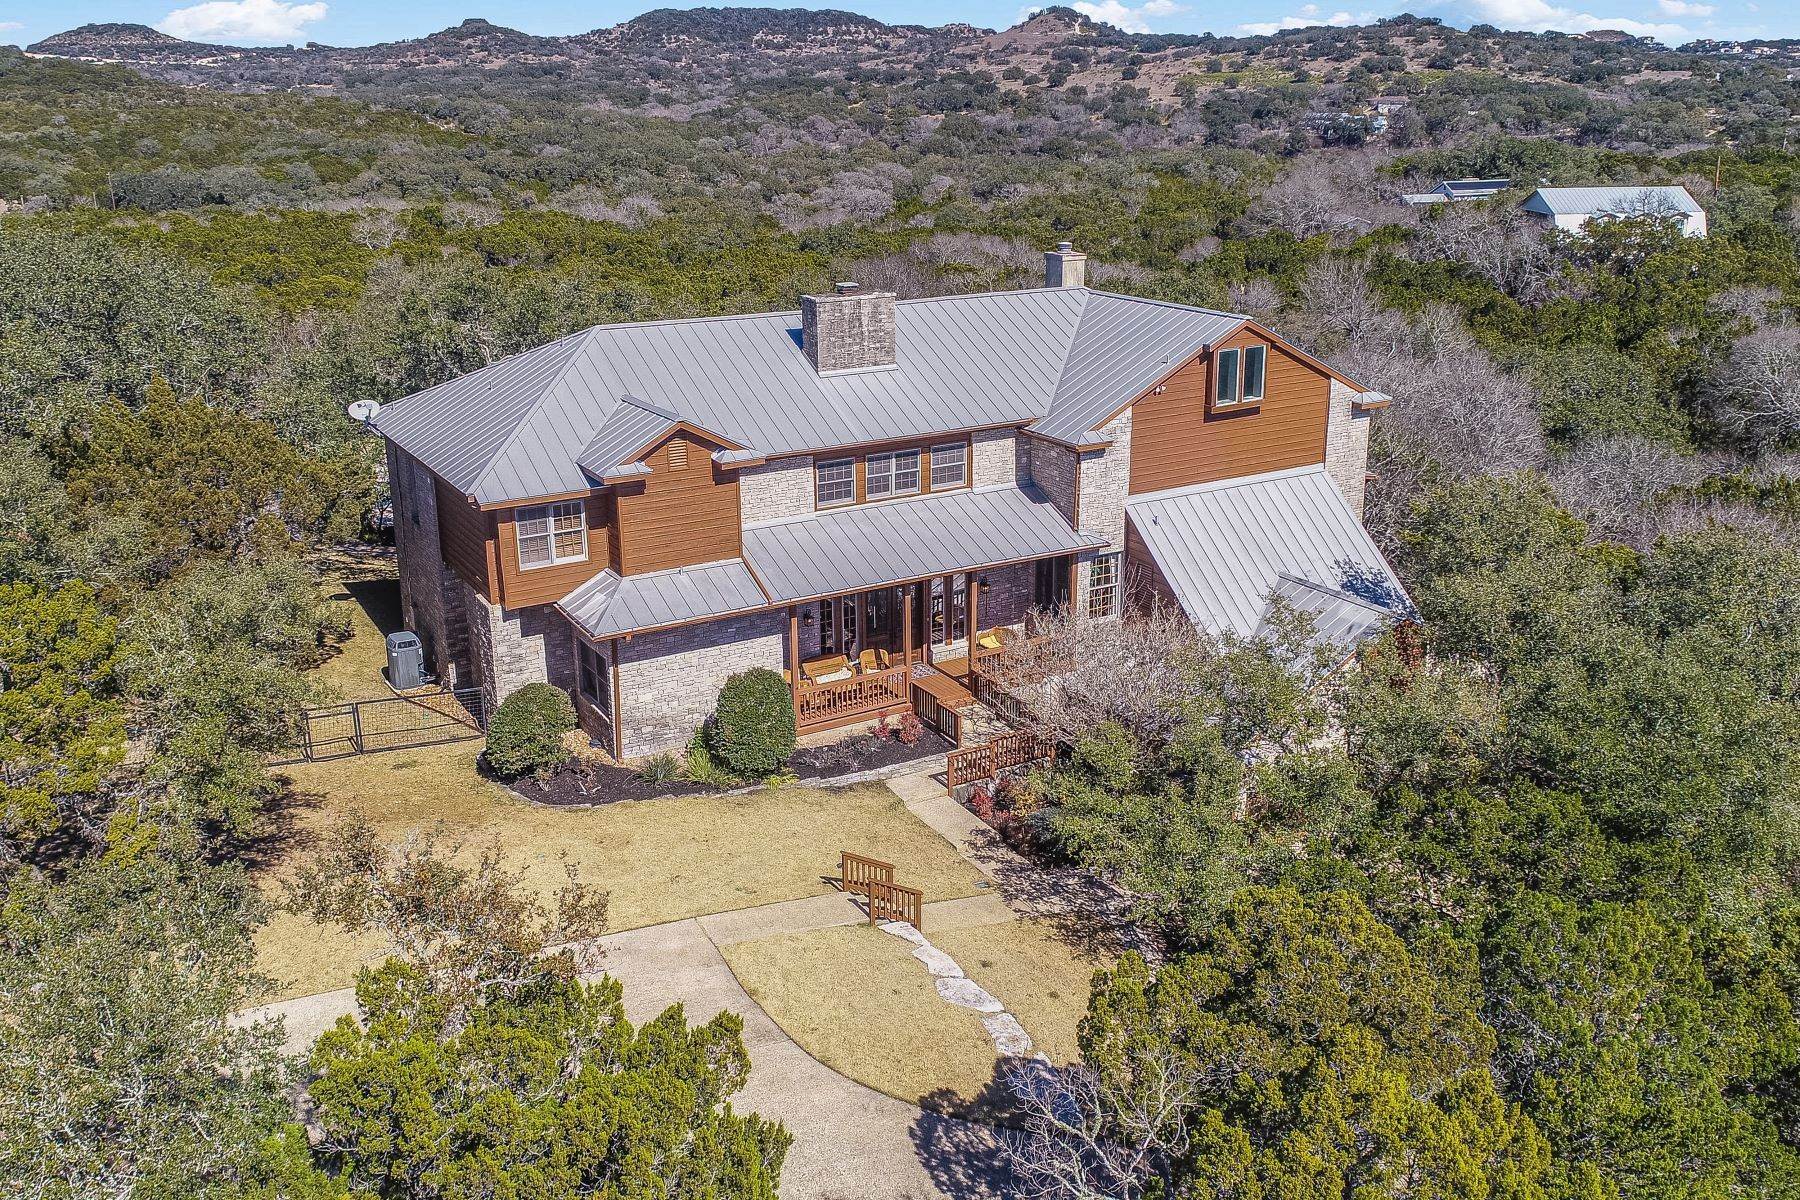 Single Family Homes for Sale at 20615 Helotes Creek Road, Helotes, TX 78023 20615 Helotes Creek Road Helotes, Texas 78023 United States